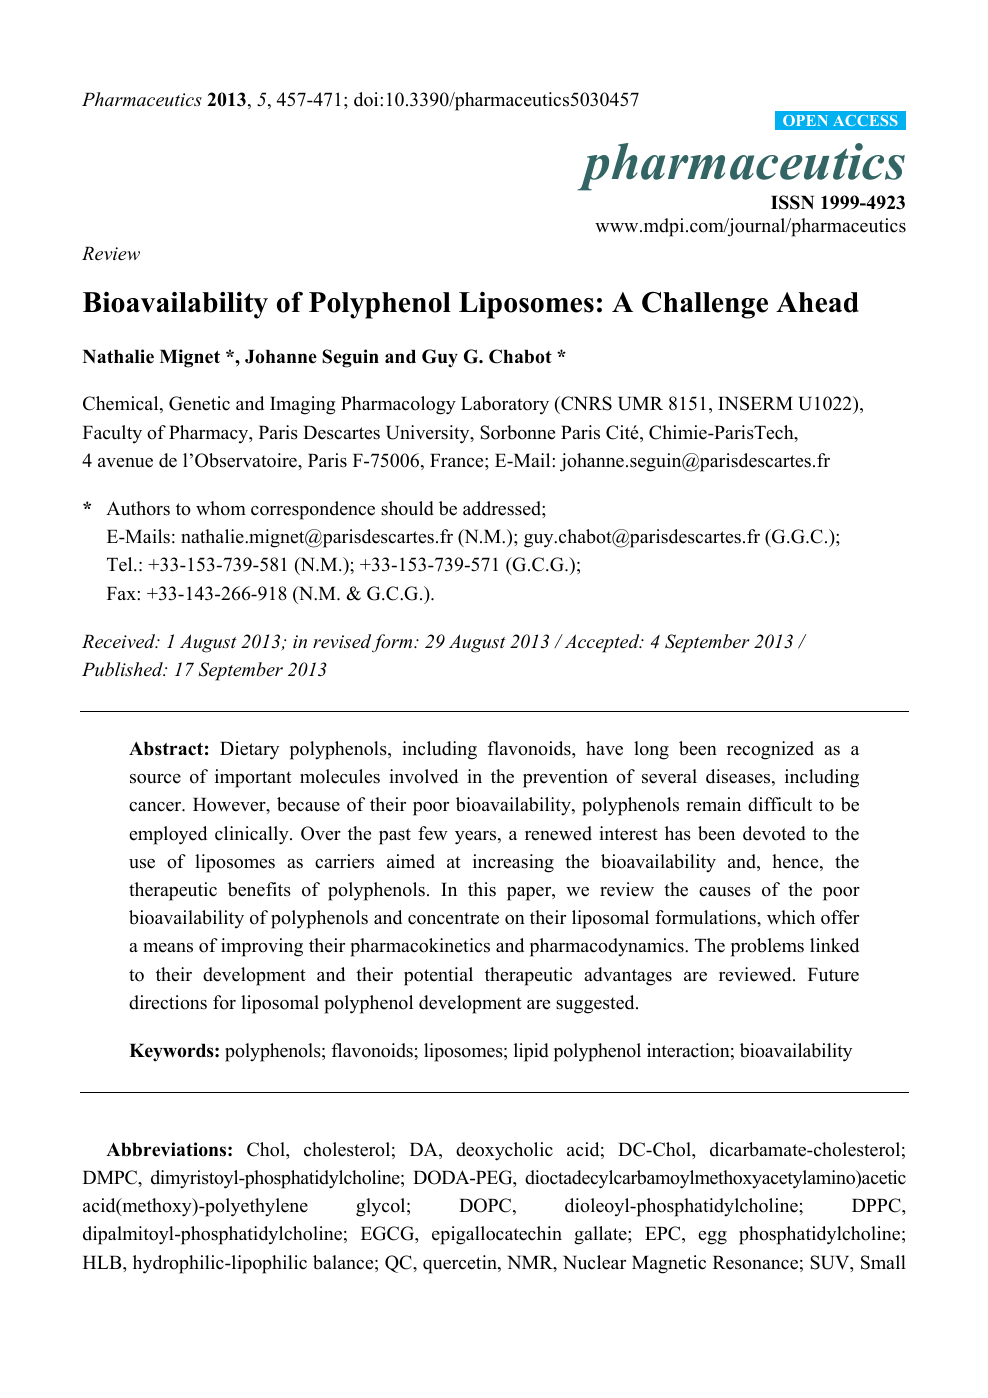 Bioavailability Of Polyphenol Liposomes A Challenge Ahead Topic Of Research Paper In Chemical Sciences Download Scholarly Article Pdf And Read For Free On Cyberleninka Open Science Hub